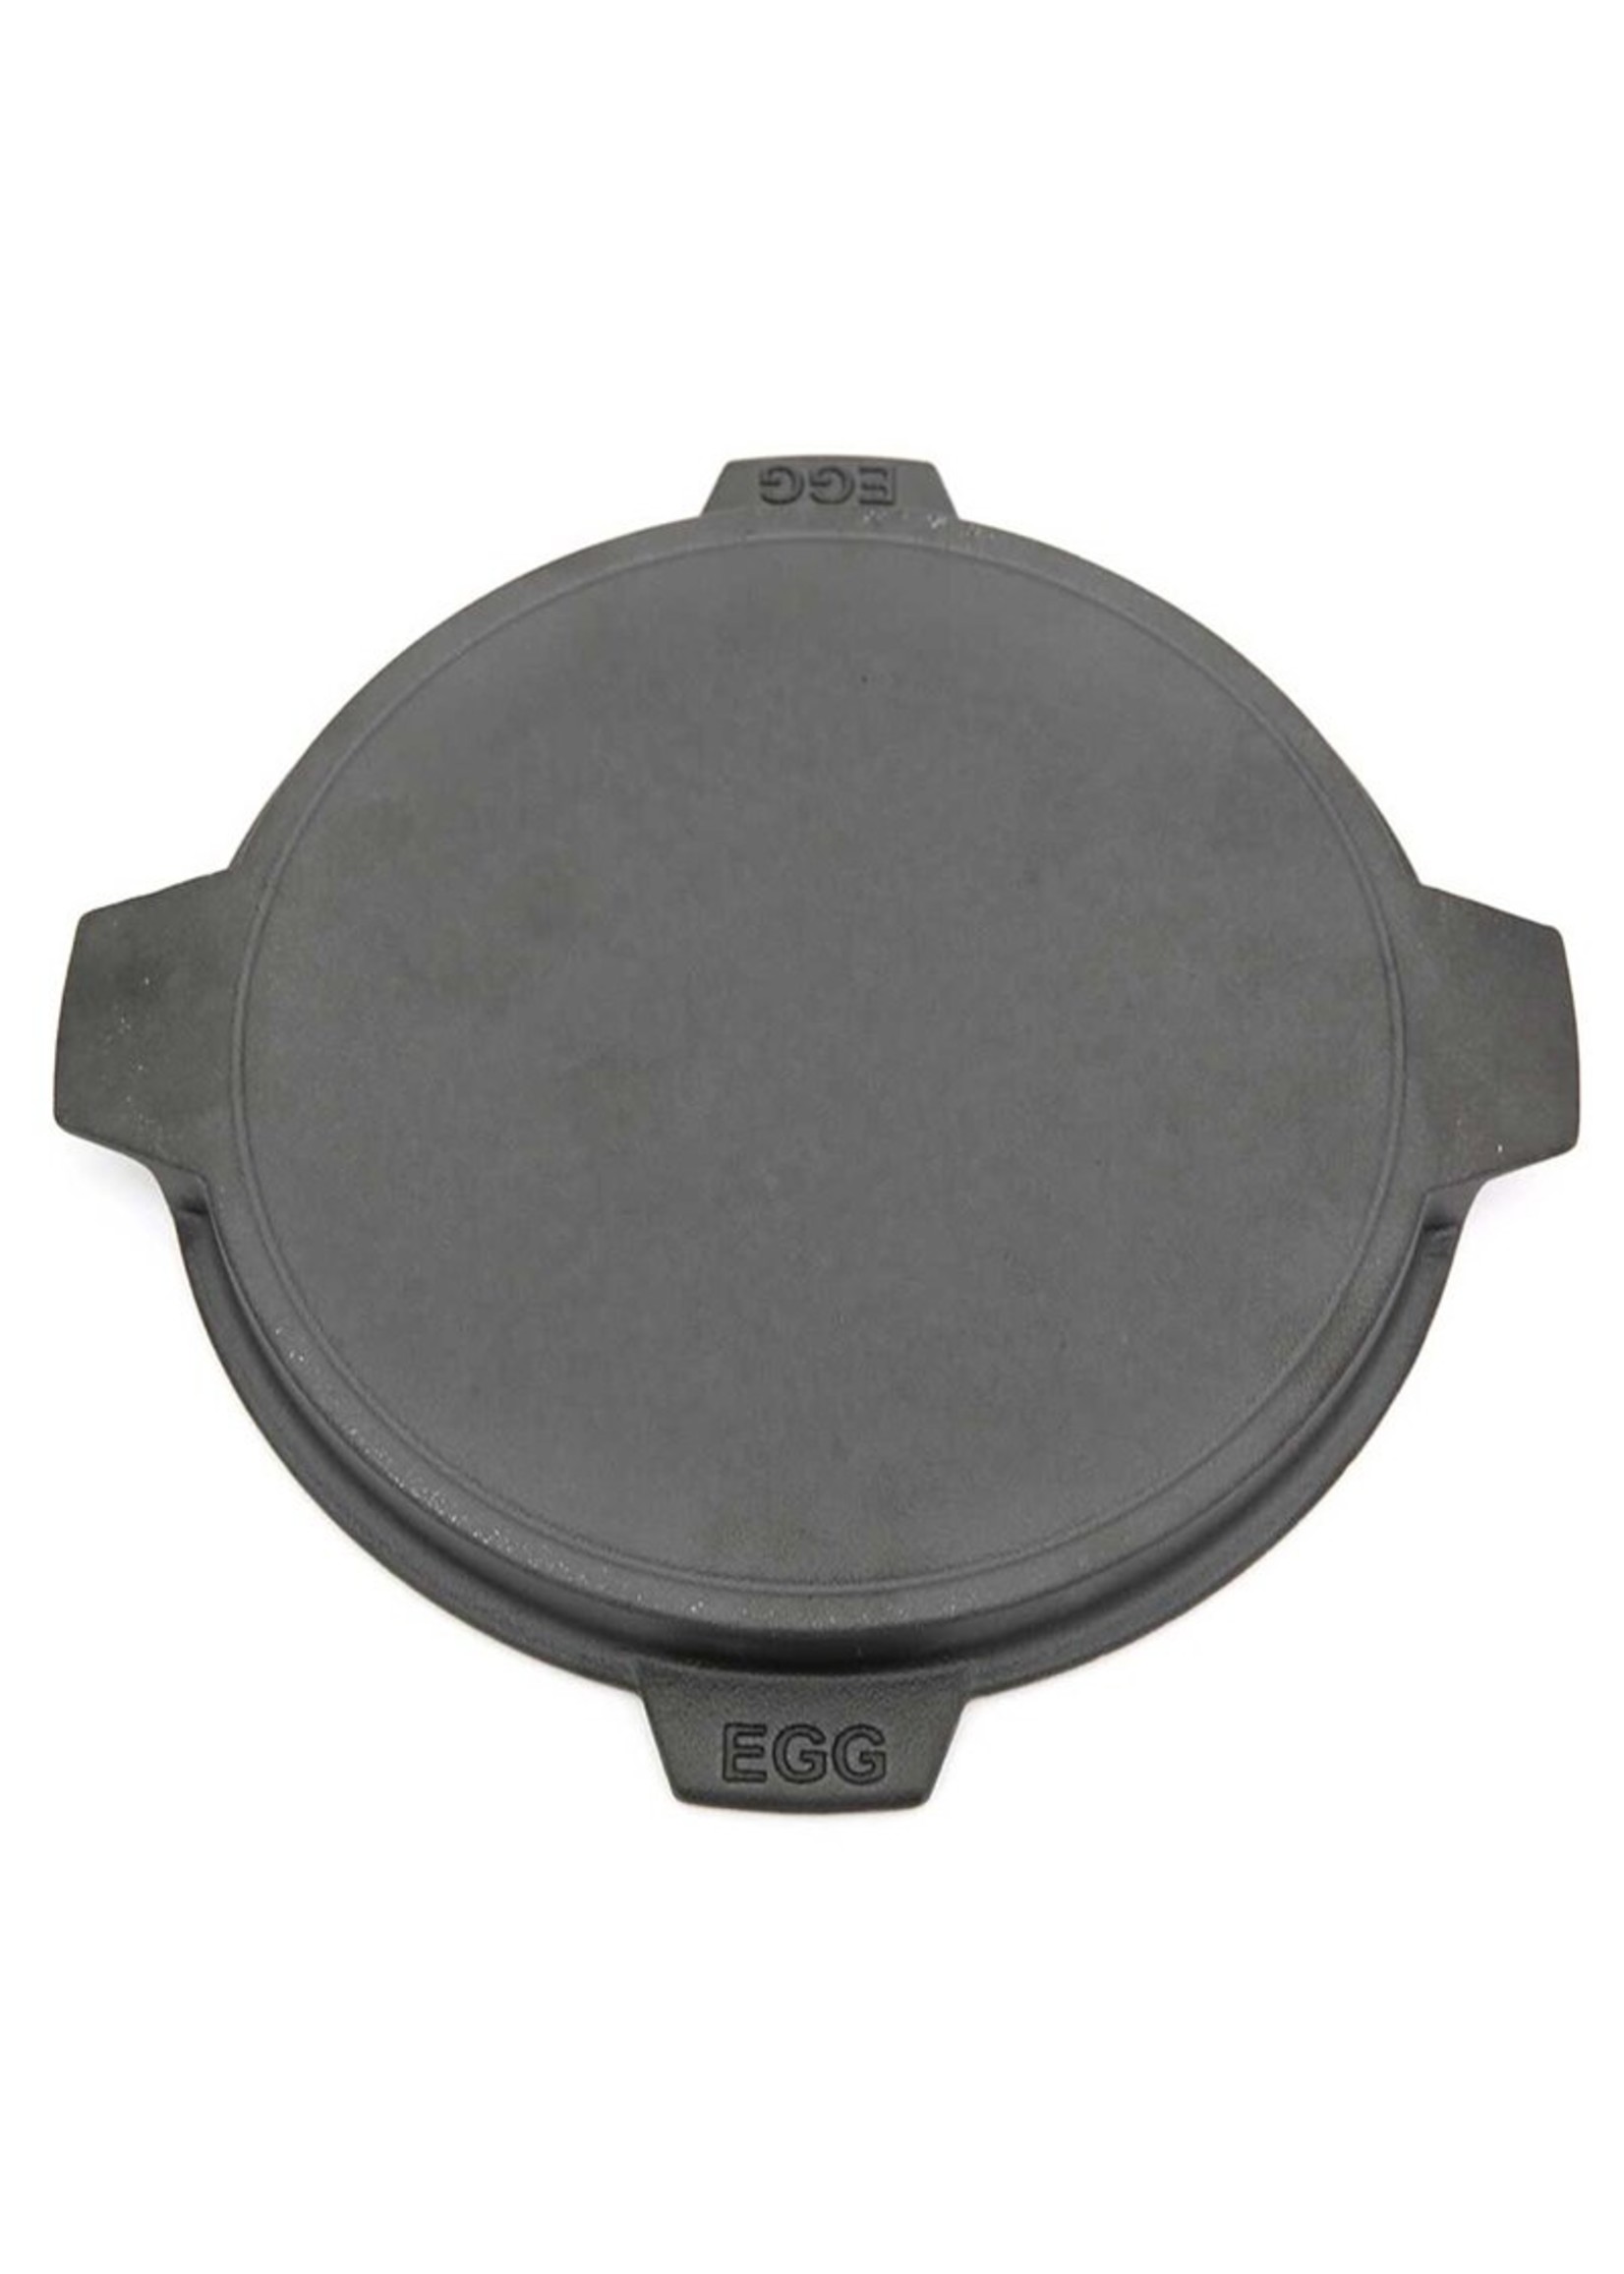 Big Green Egg BGE 14in Dual-Sided Cast Iron Plancha Griddle